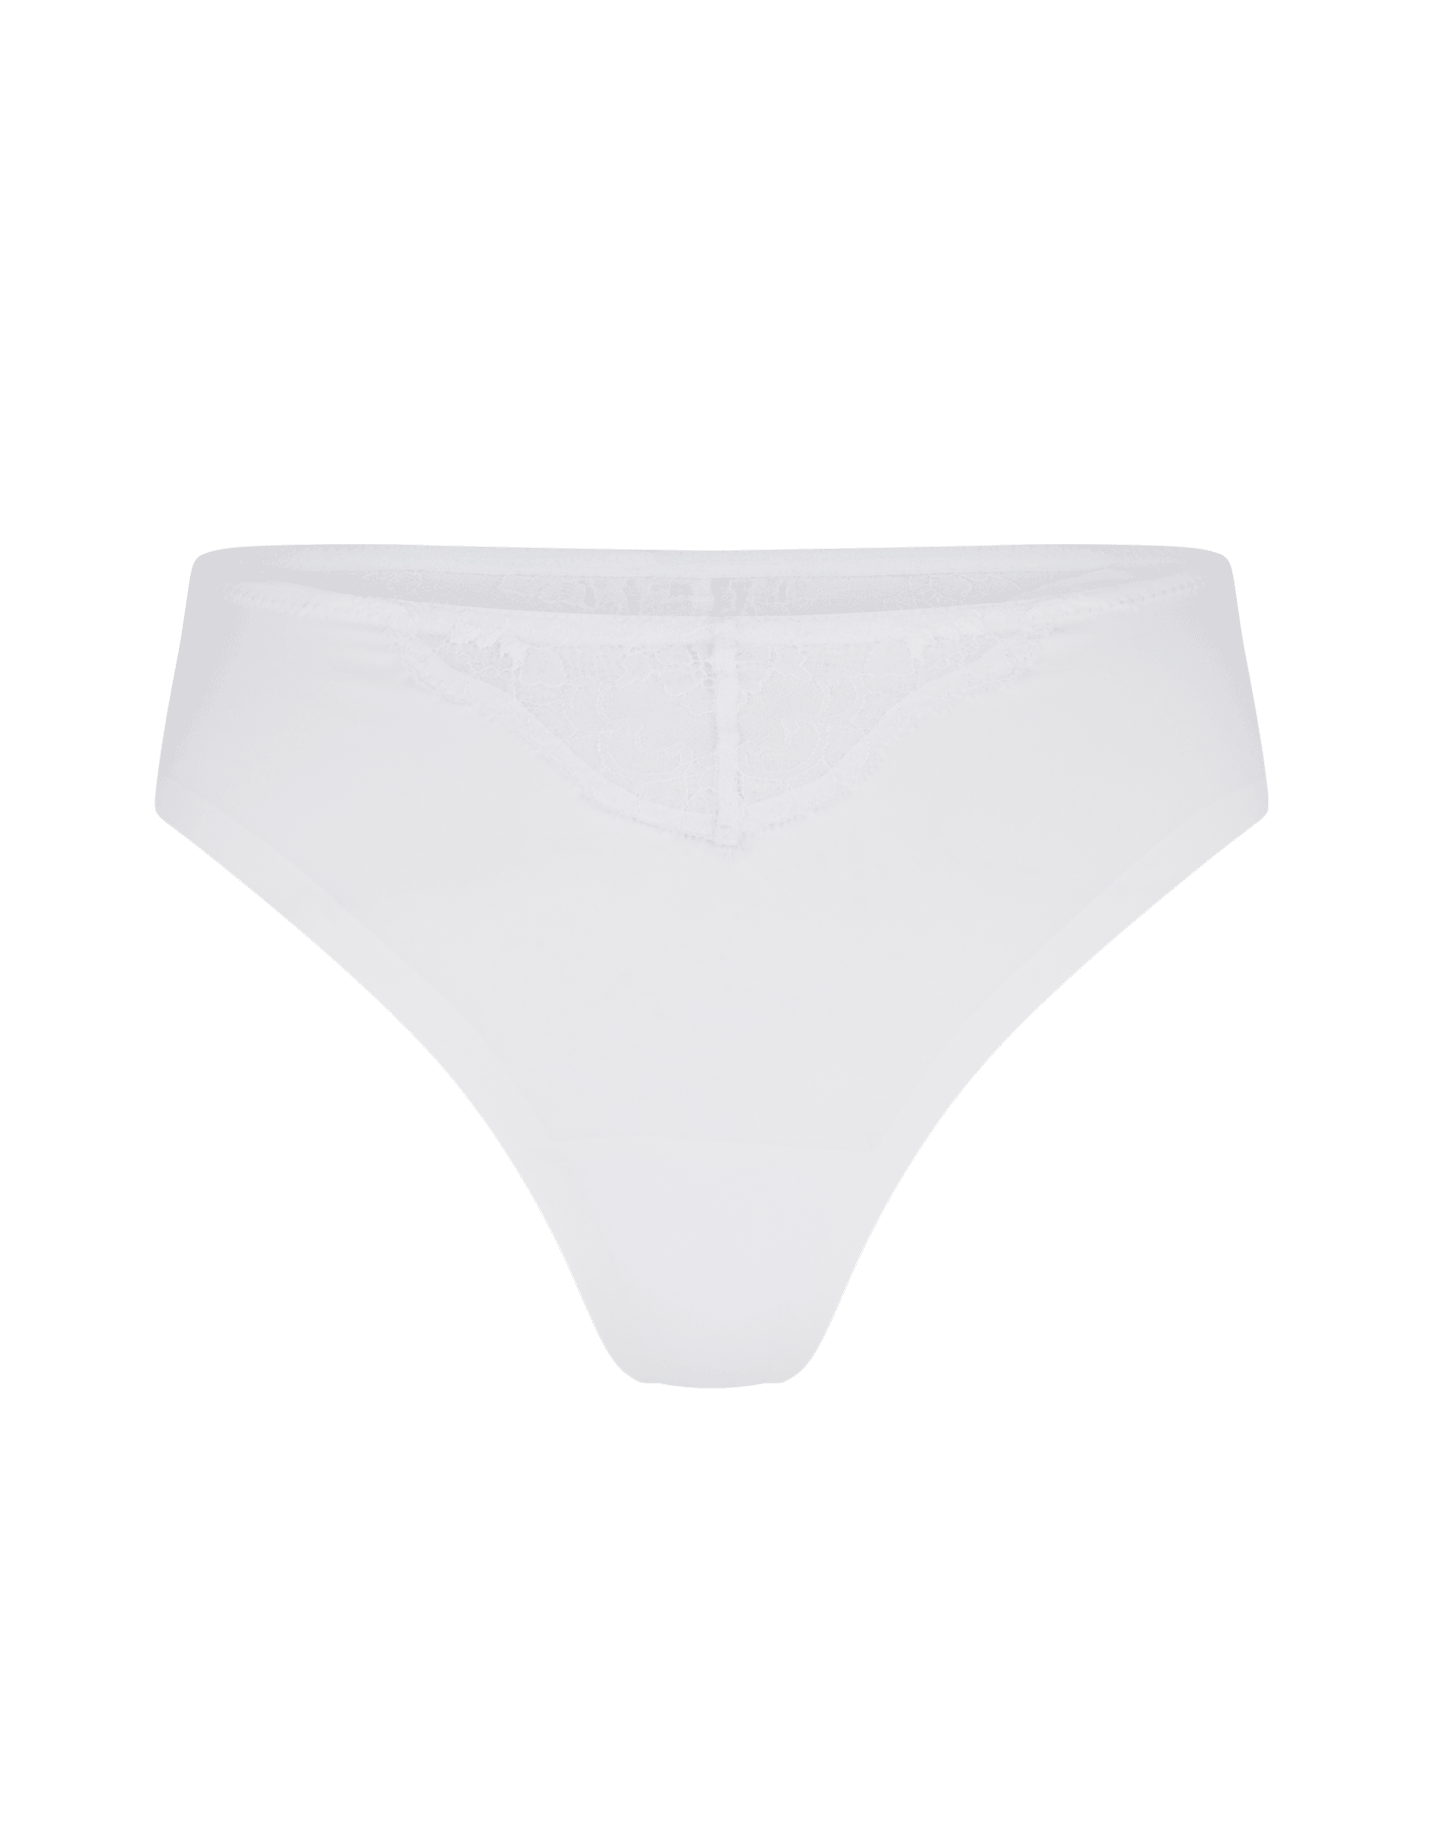 Brigette Thong in White | Agent Provocateur